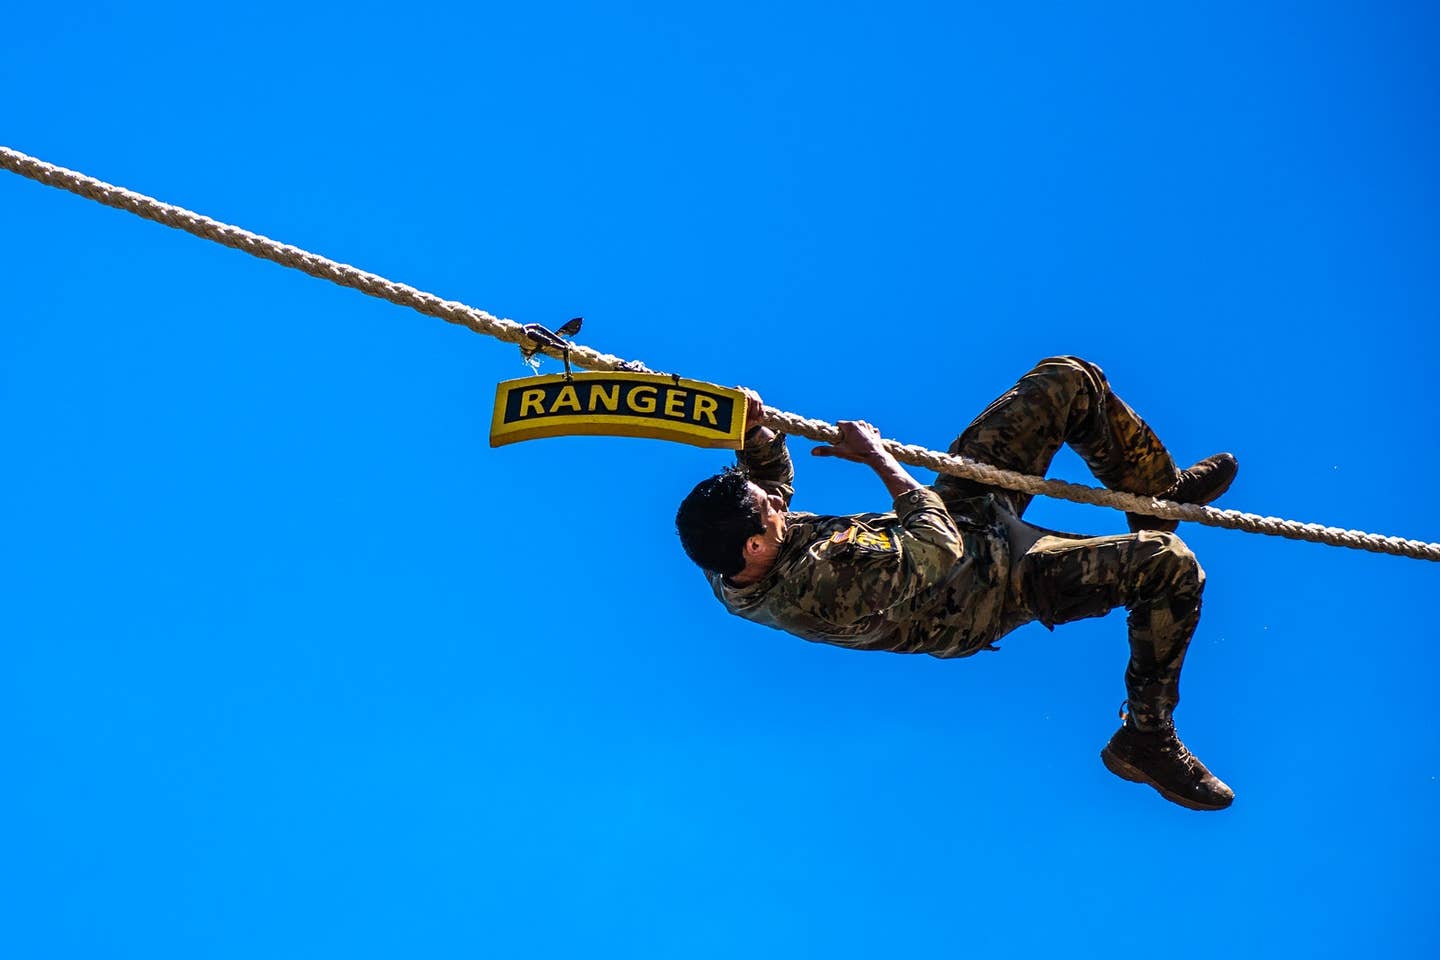 FORT BENNING, Ga. - After two full days and nights of events to test their stamina, technical prowess and mental acuity, 16 teams crossed the finish line April 18, concluding the 2021 Best Ranger Competition. (U.S. Army photo by Patrick Albright, Maneuver Center of Excellence, Fort Benning Public Affairs)